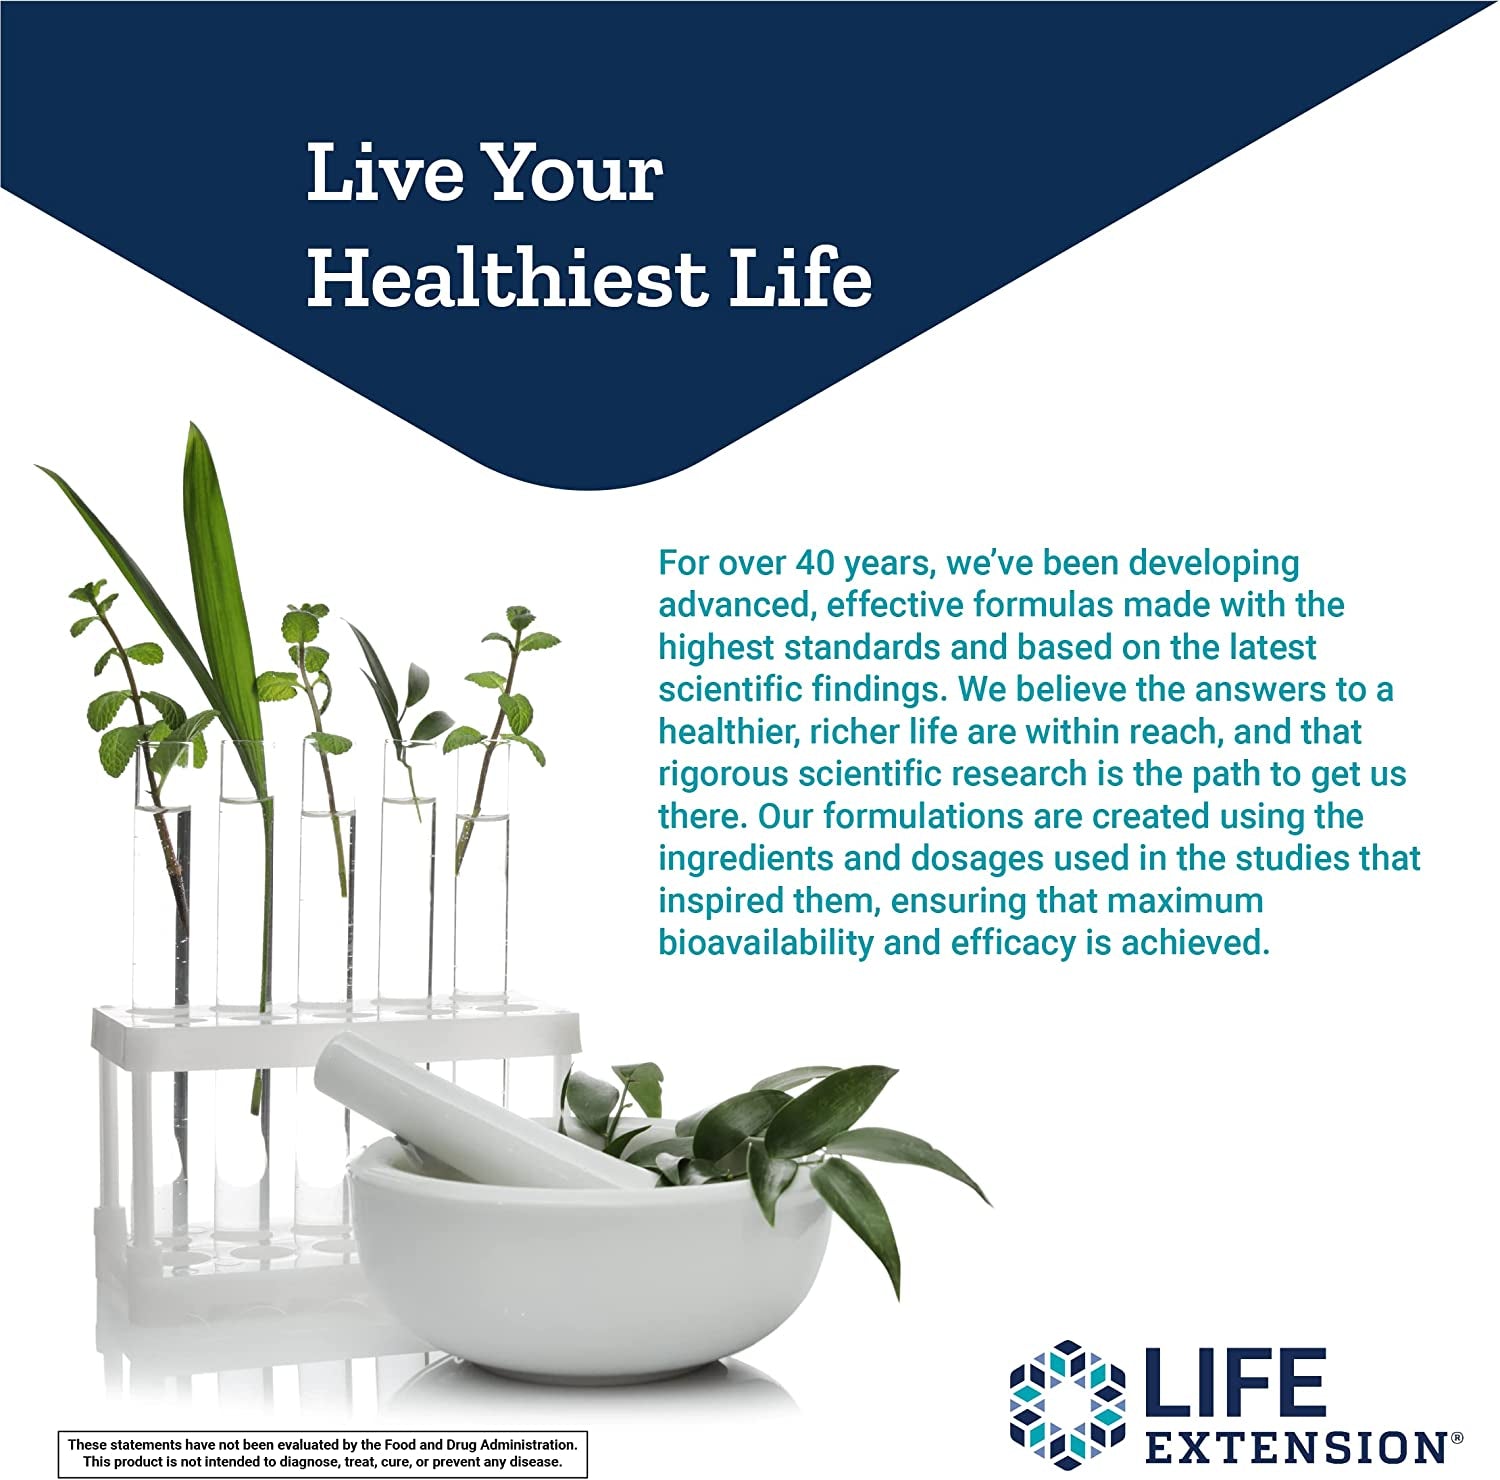 Life Extension Optimized Resveratrol Elite - Highly Bioavailable Trans Resveratrol Supplement - from Grape & Japanese Knotweed - for Brain Health - Gluten-Free, Non-Gmo - 60 Vegetarian Capsules